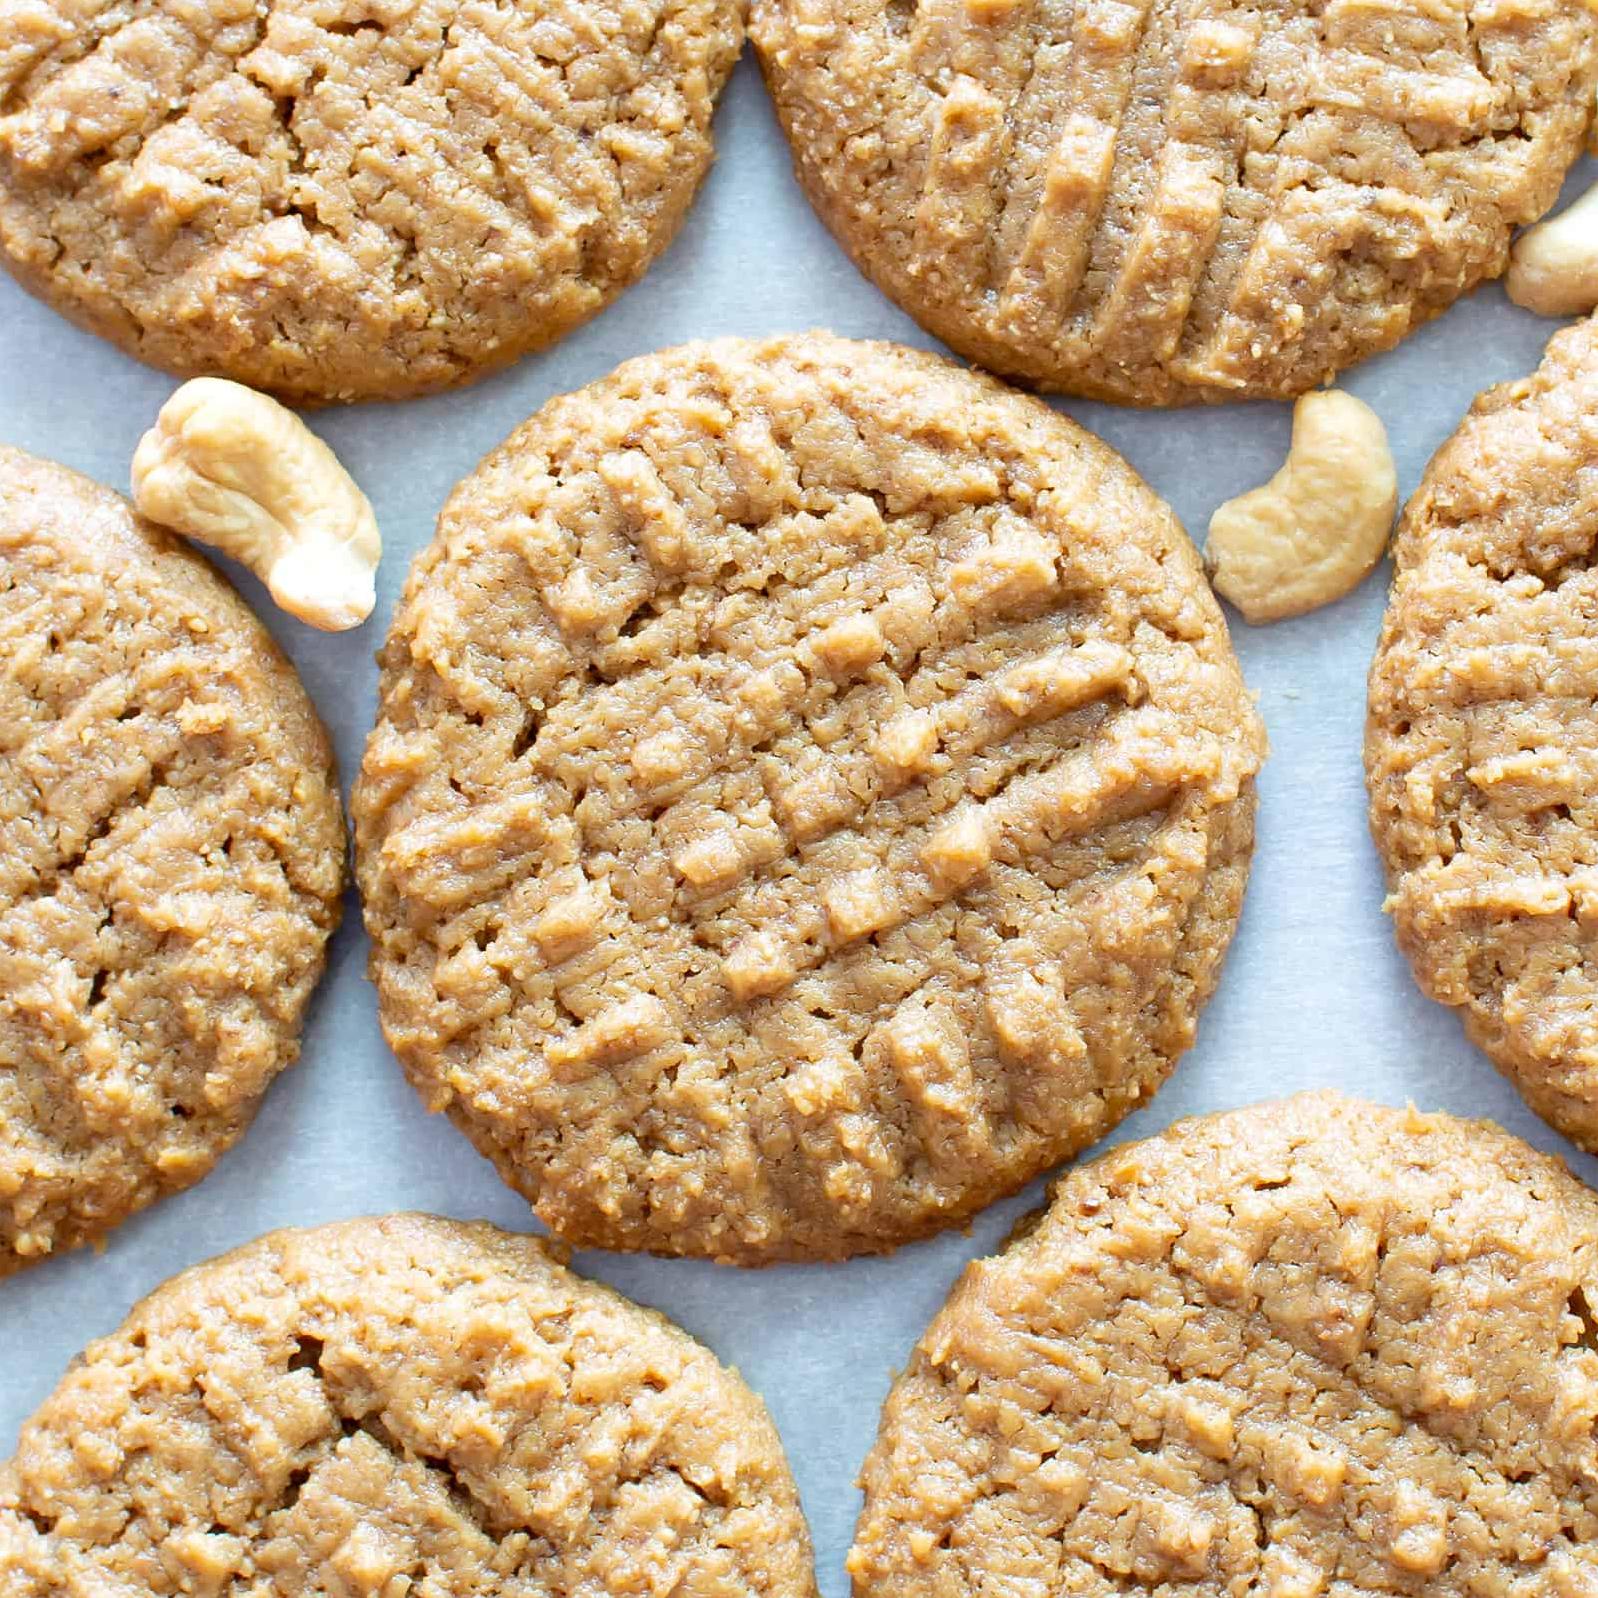  Soft and chewy gluten-free cashew cookies